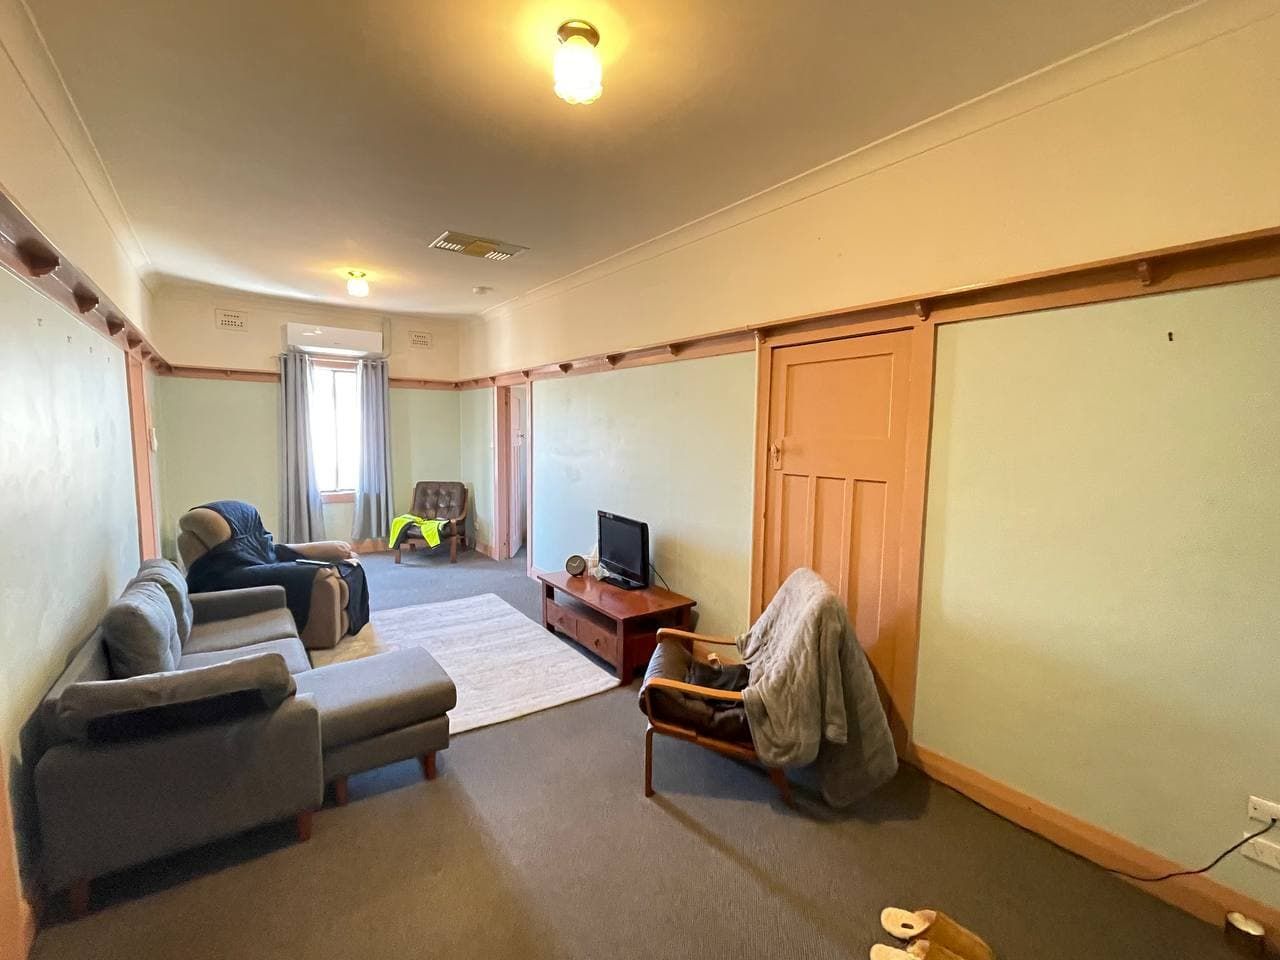 2 bedrooms Apartment / Unit / Flat in 1/25 Church Street PARKES NSW, 2870